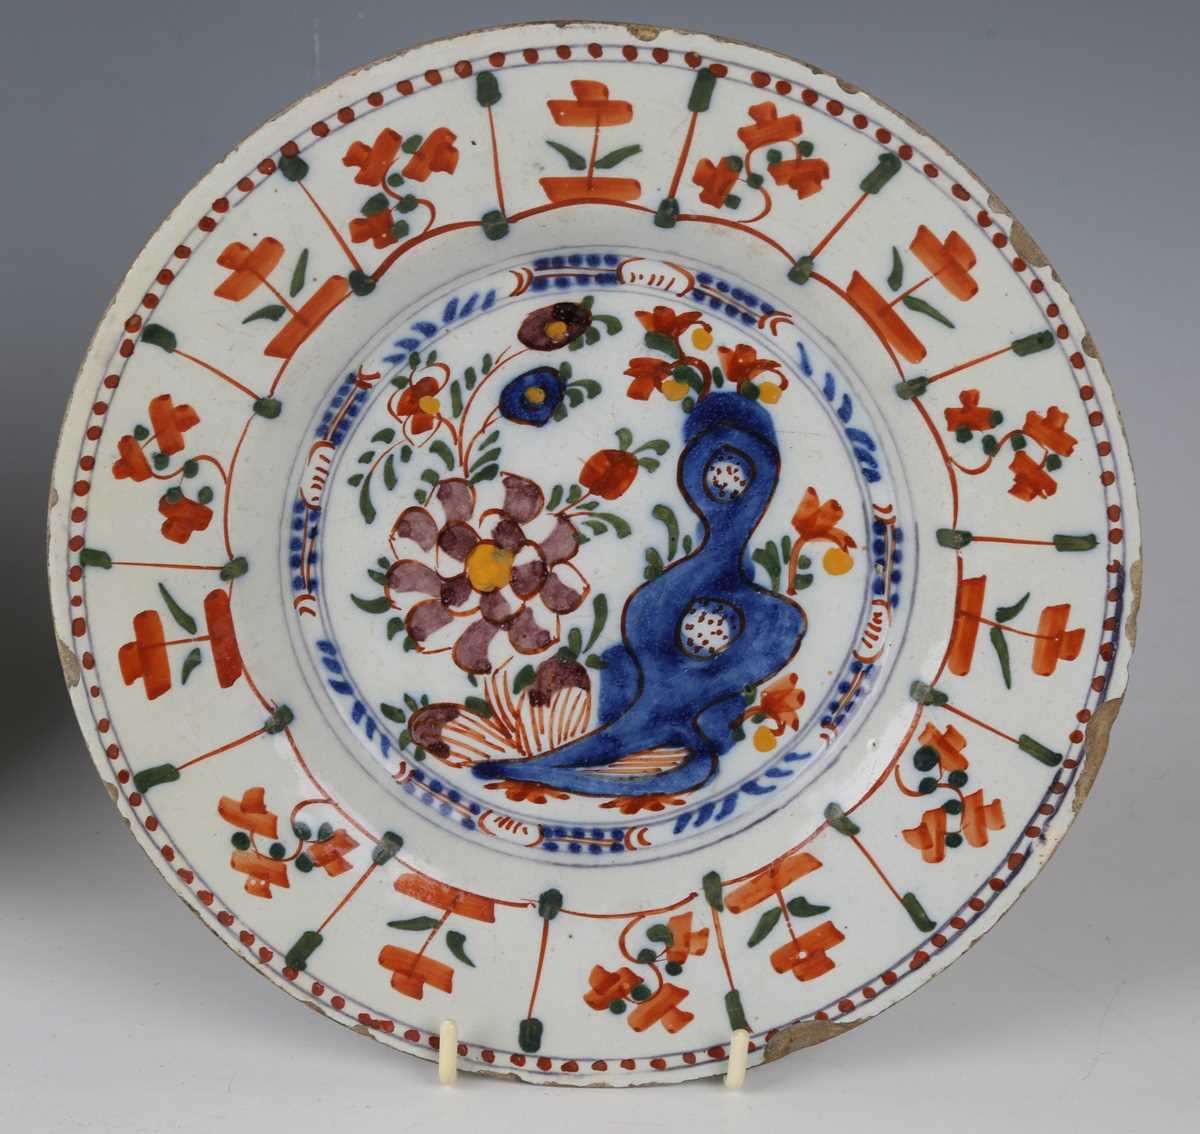 A Dutch delft Peacock pattern plate by De Porceleyne Claeuw, 18th century, painted in blue within an - Image 5 of 8